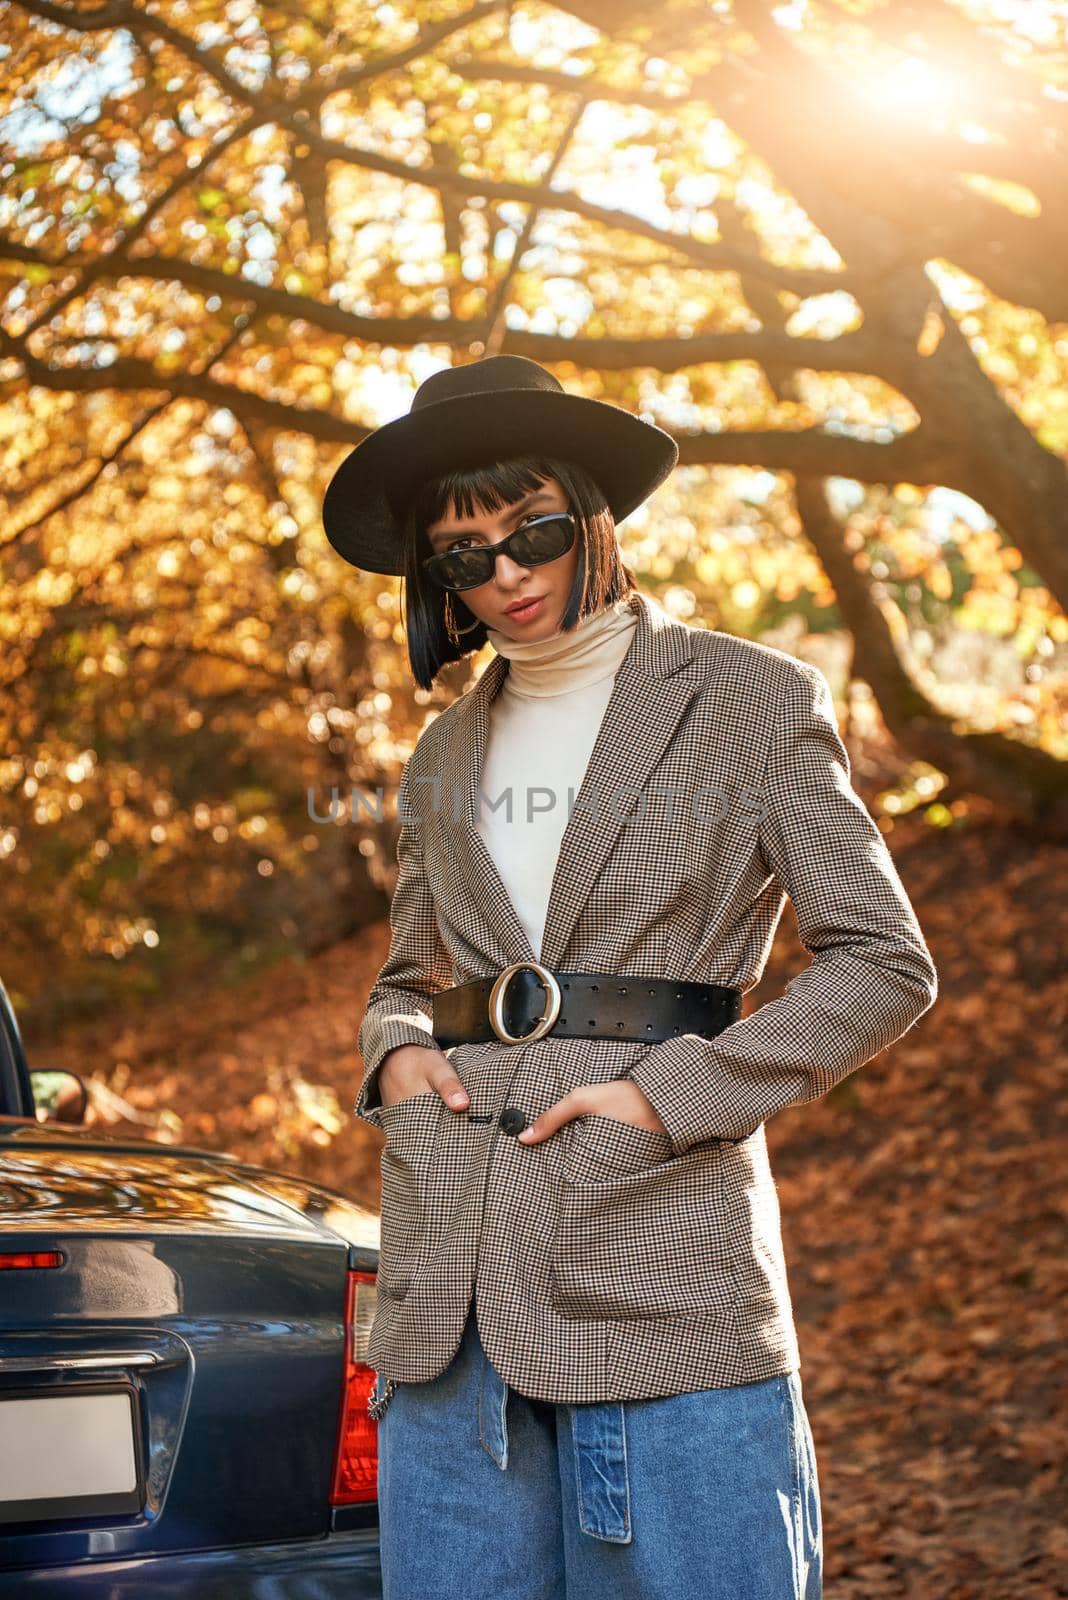 Attractive young woman posing near cabriolet. She wears black hat and sunglasses. Stylish autumn.